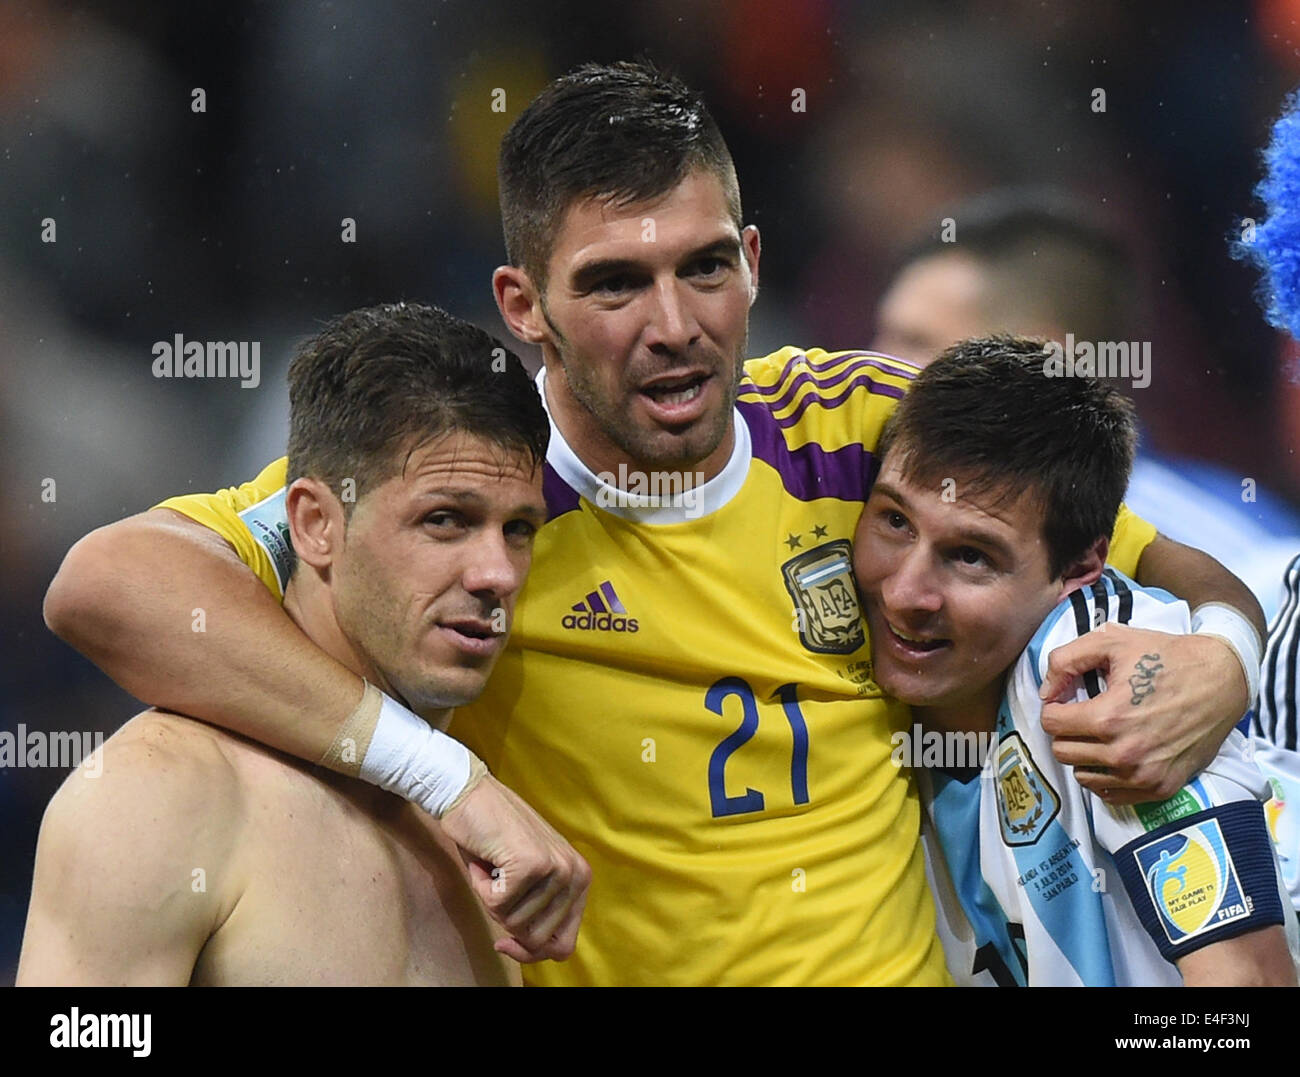 Sao Paulo, Brazil. 09th July, 2014. Argentina's Lionel Messi (R) and Martin Demichelis (L) and goalkeeper Mariano Andujar celebrate after winning the penalty shoot-out of the FIFA World Cup 2014 semi-final soccer match between the Netherlands and Argentina at the Arena Corinthians in Sao Paulo, Brazil, 09 July 2014. Photo: Marius Becker/dpa/Alamy Live News Stock Photo